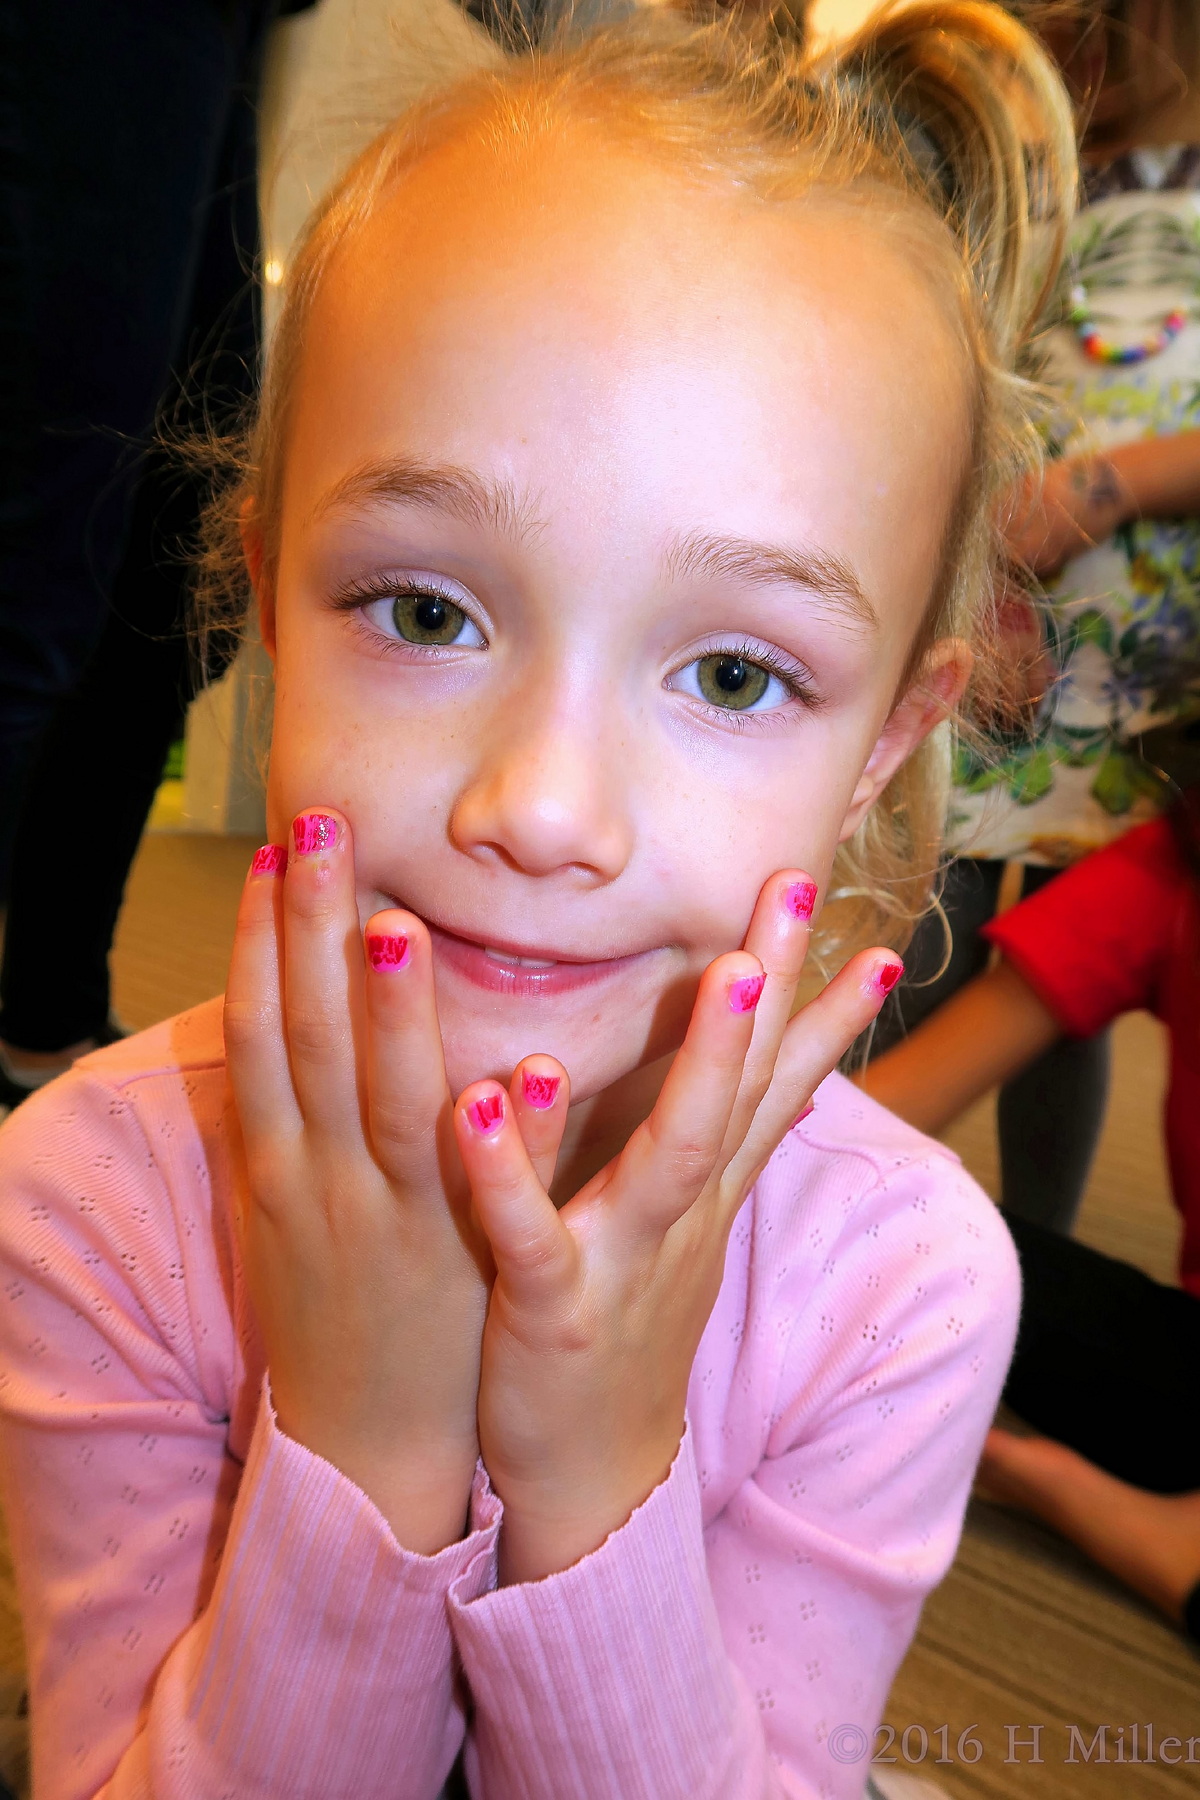 She Loves Her New Mini Manicure! 